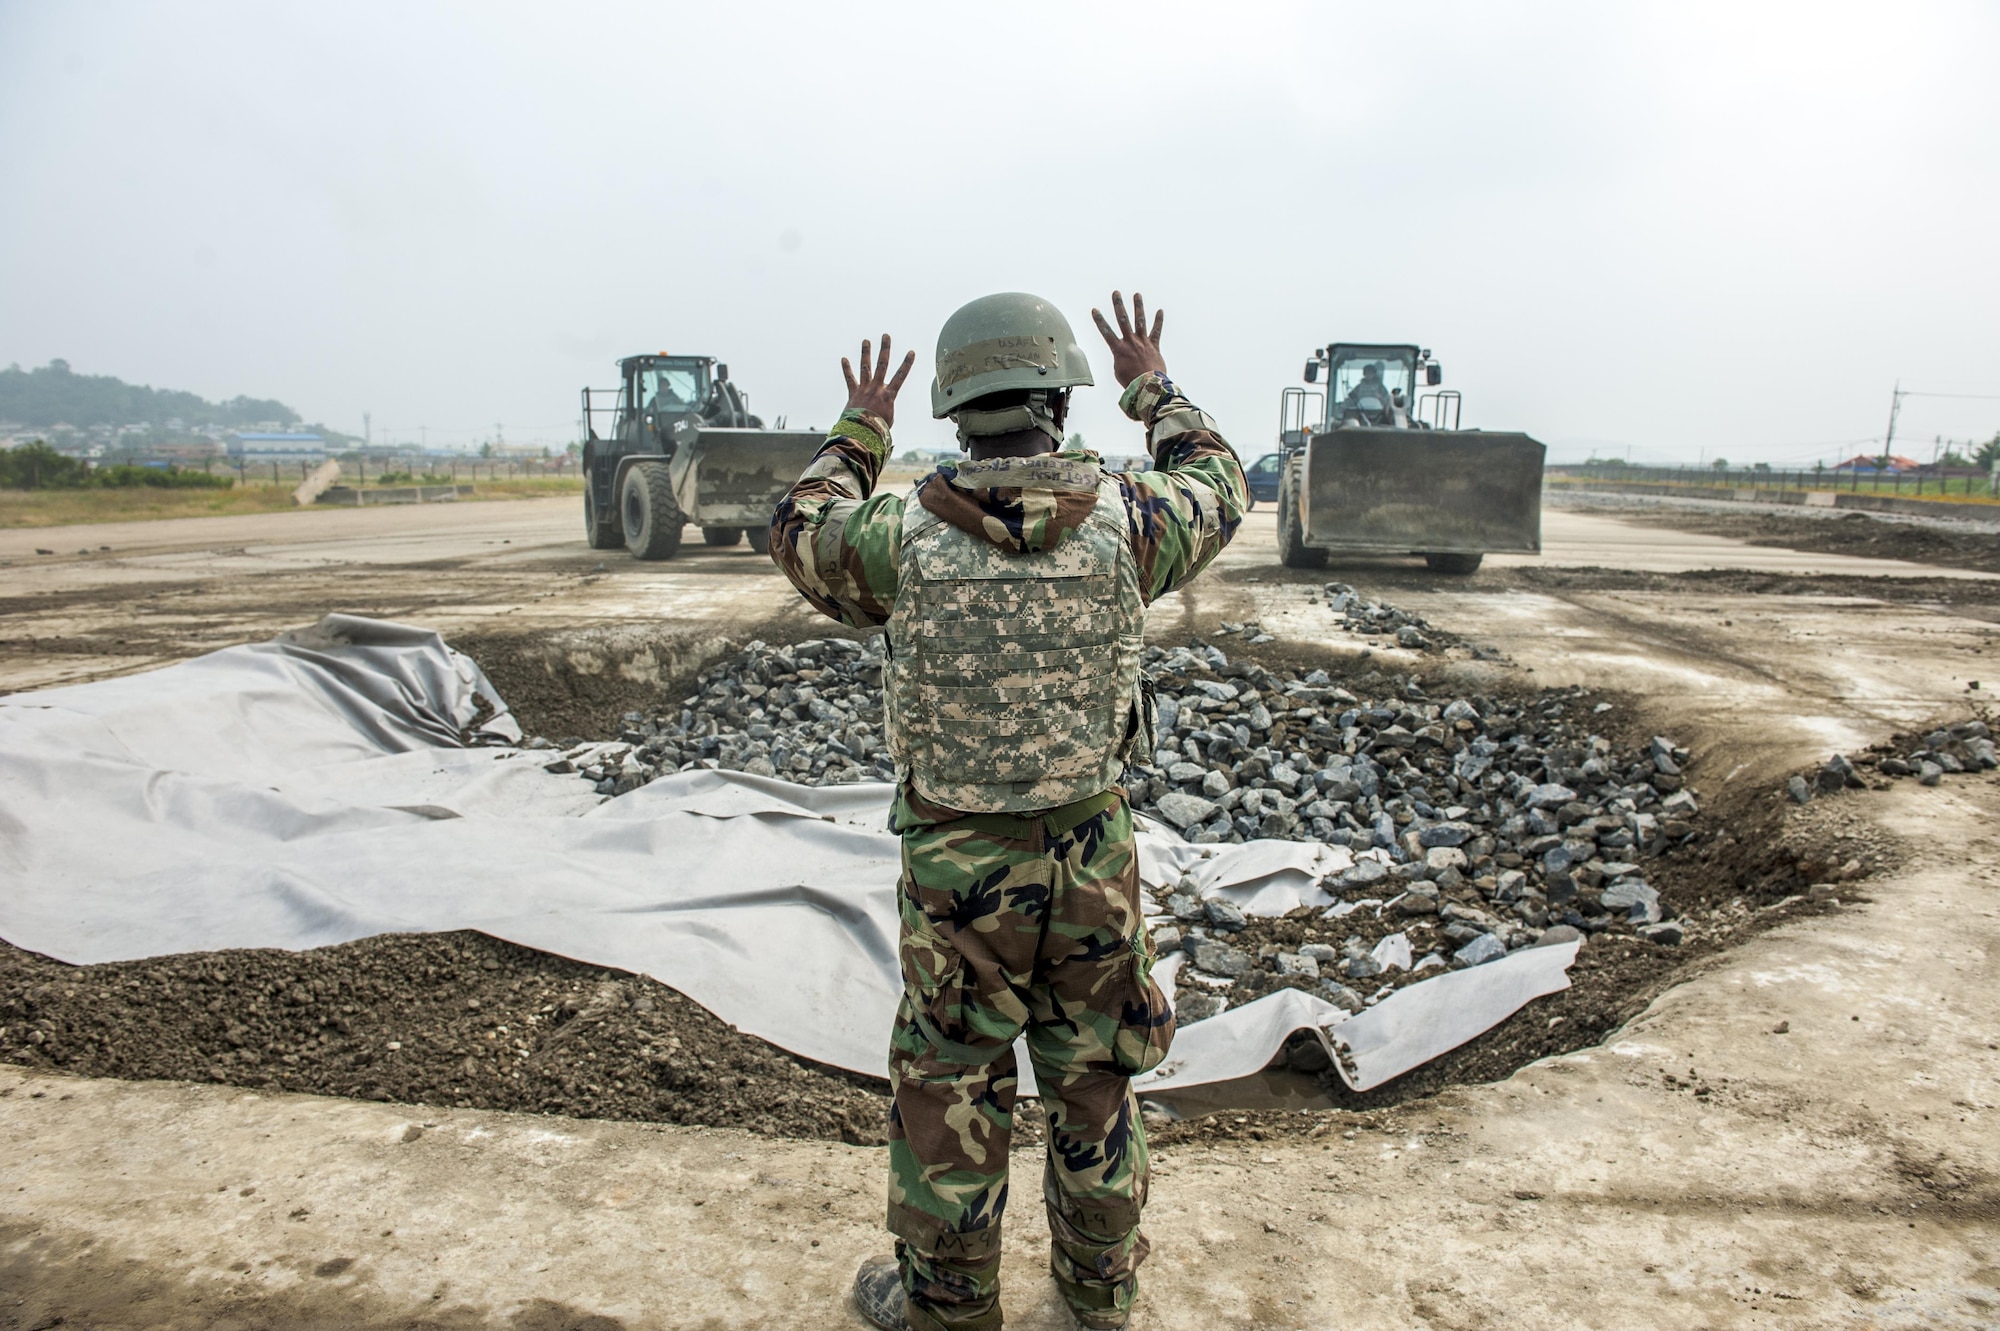 U.S. Air Force Tech. Sgt. Freeman Gleaves, 8th Civil Engineering Squadron pavement and construction craftsman, communicates with two loaders June 29, 2017, at Kunsan Air Base, Republic of Korea. The CES Airmen were tasked with repairing a damaged portion of the runway while participating in an airfield damage repair exercise. (U.S. Air Force photo by Senior Airman Colville McFee/Released)